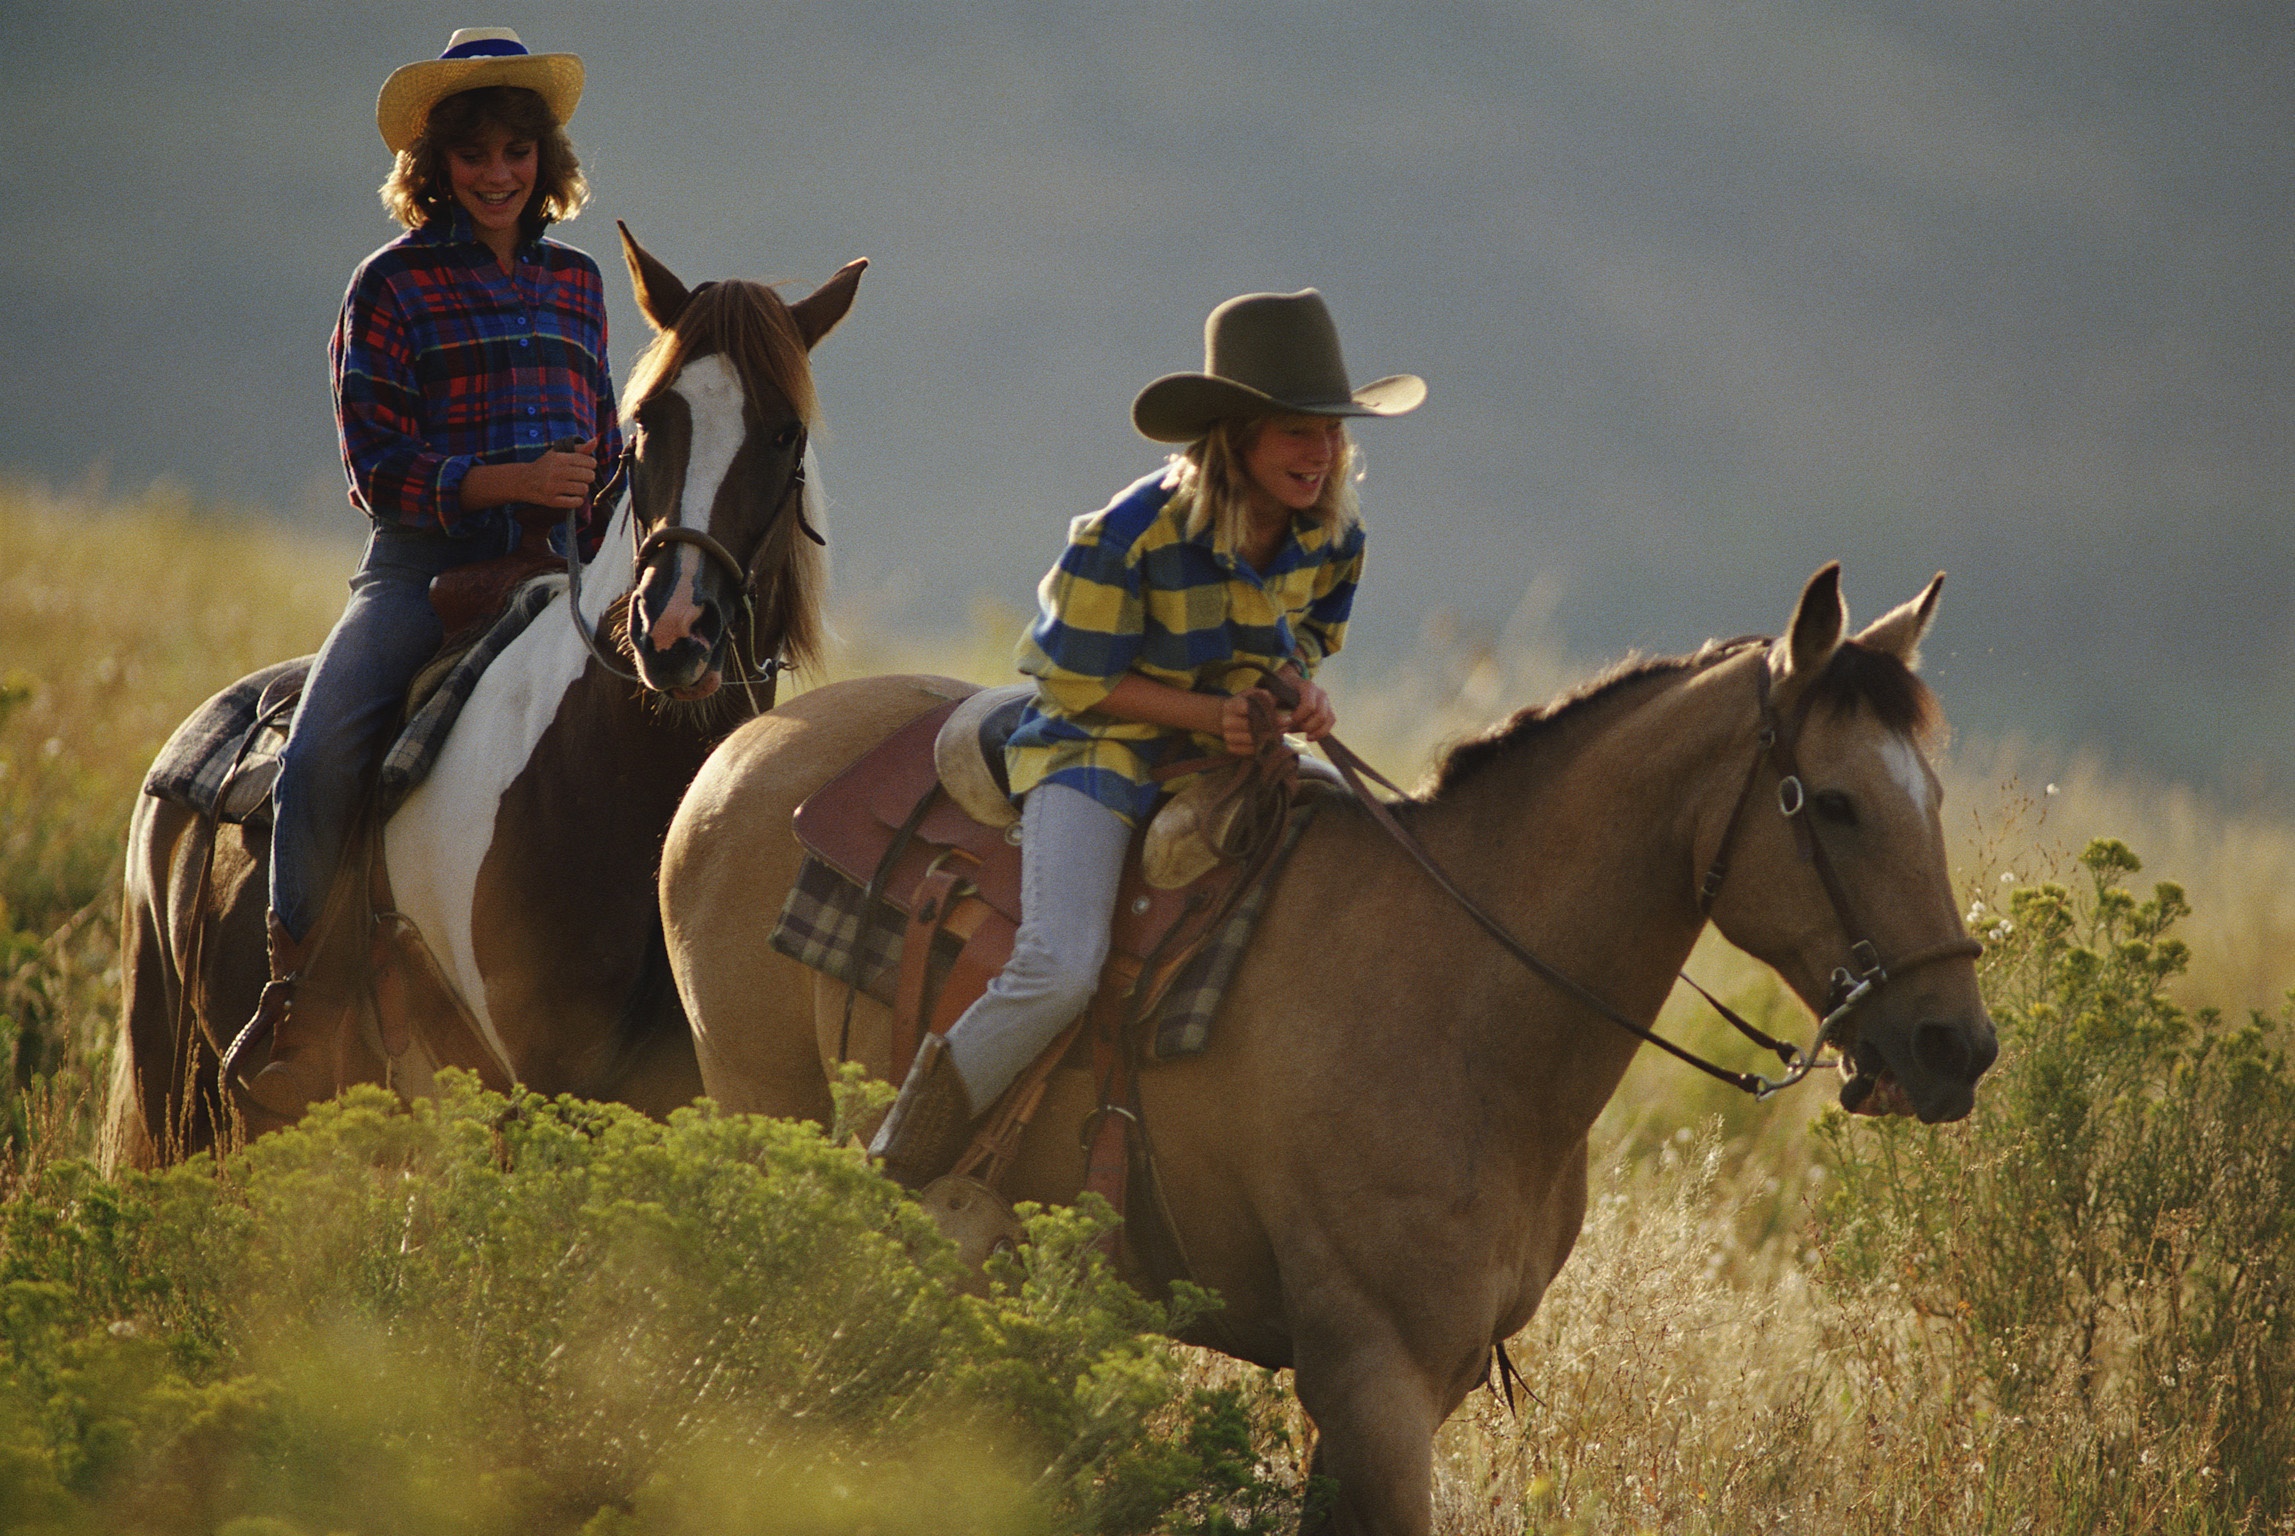 Can Horseback Riding Help Children with Autism?